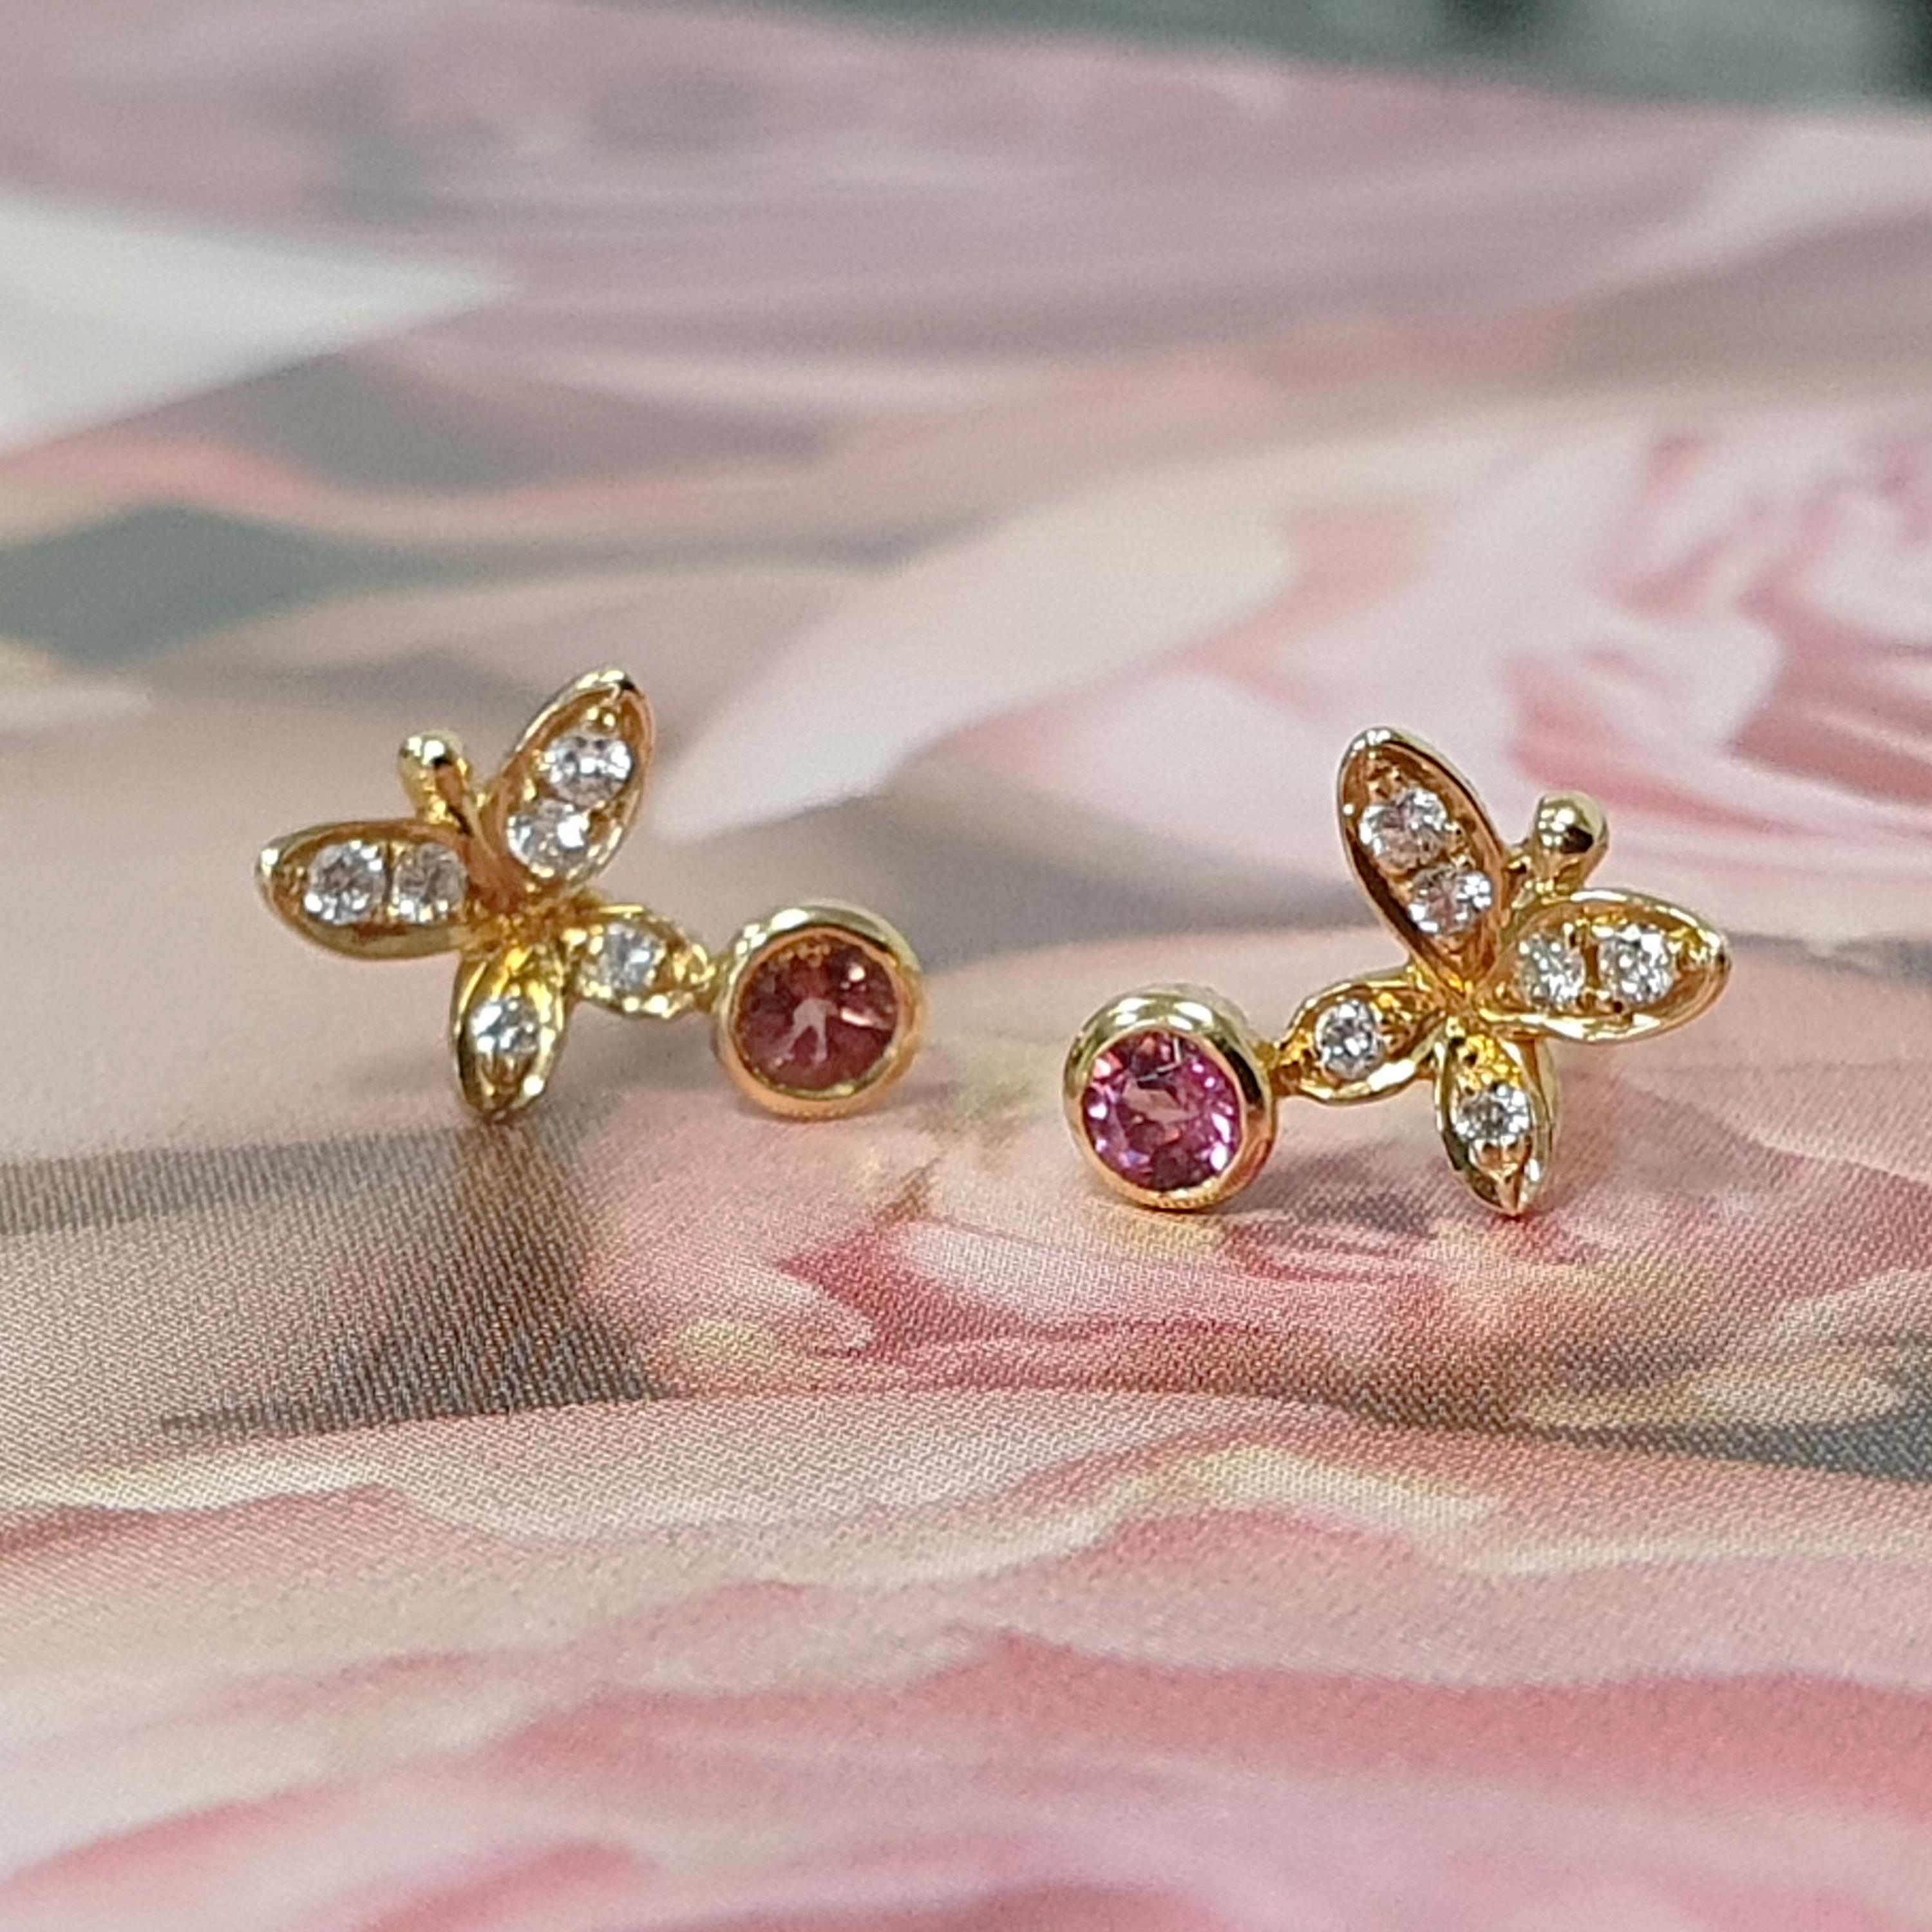 Description:
Dainty butterfly earrings from the Fei Liu 'Buddleia' collection, featuring 0.056ct diamond set butterflies with 0.1ct pink tourmalines, set in 18ct yellow gold.

Inspiration:
Fei Liu Buddleia explores the irresistible allure of fine